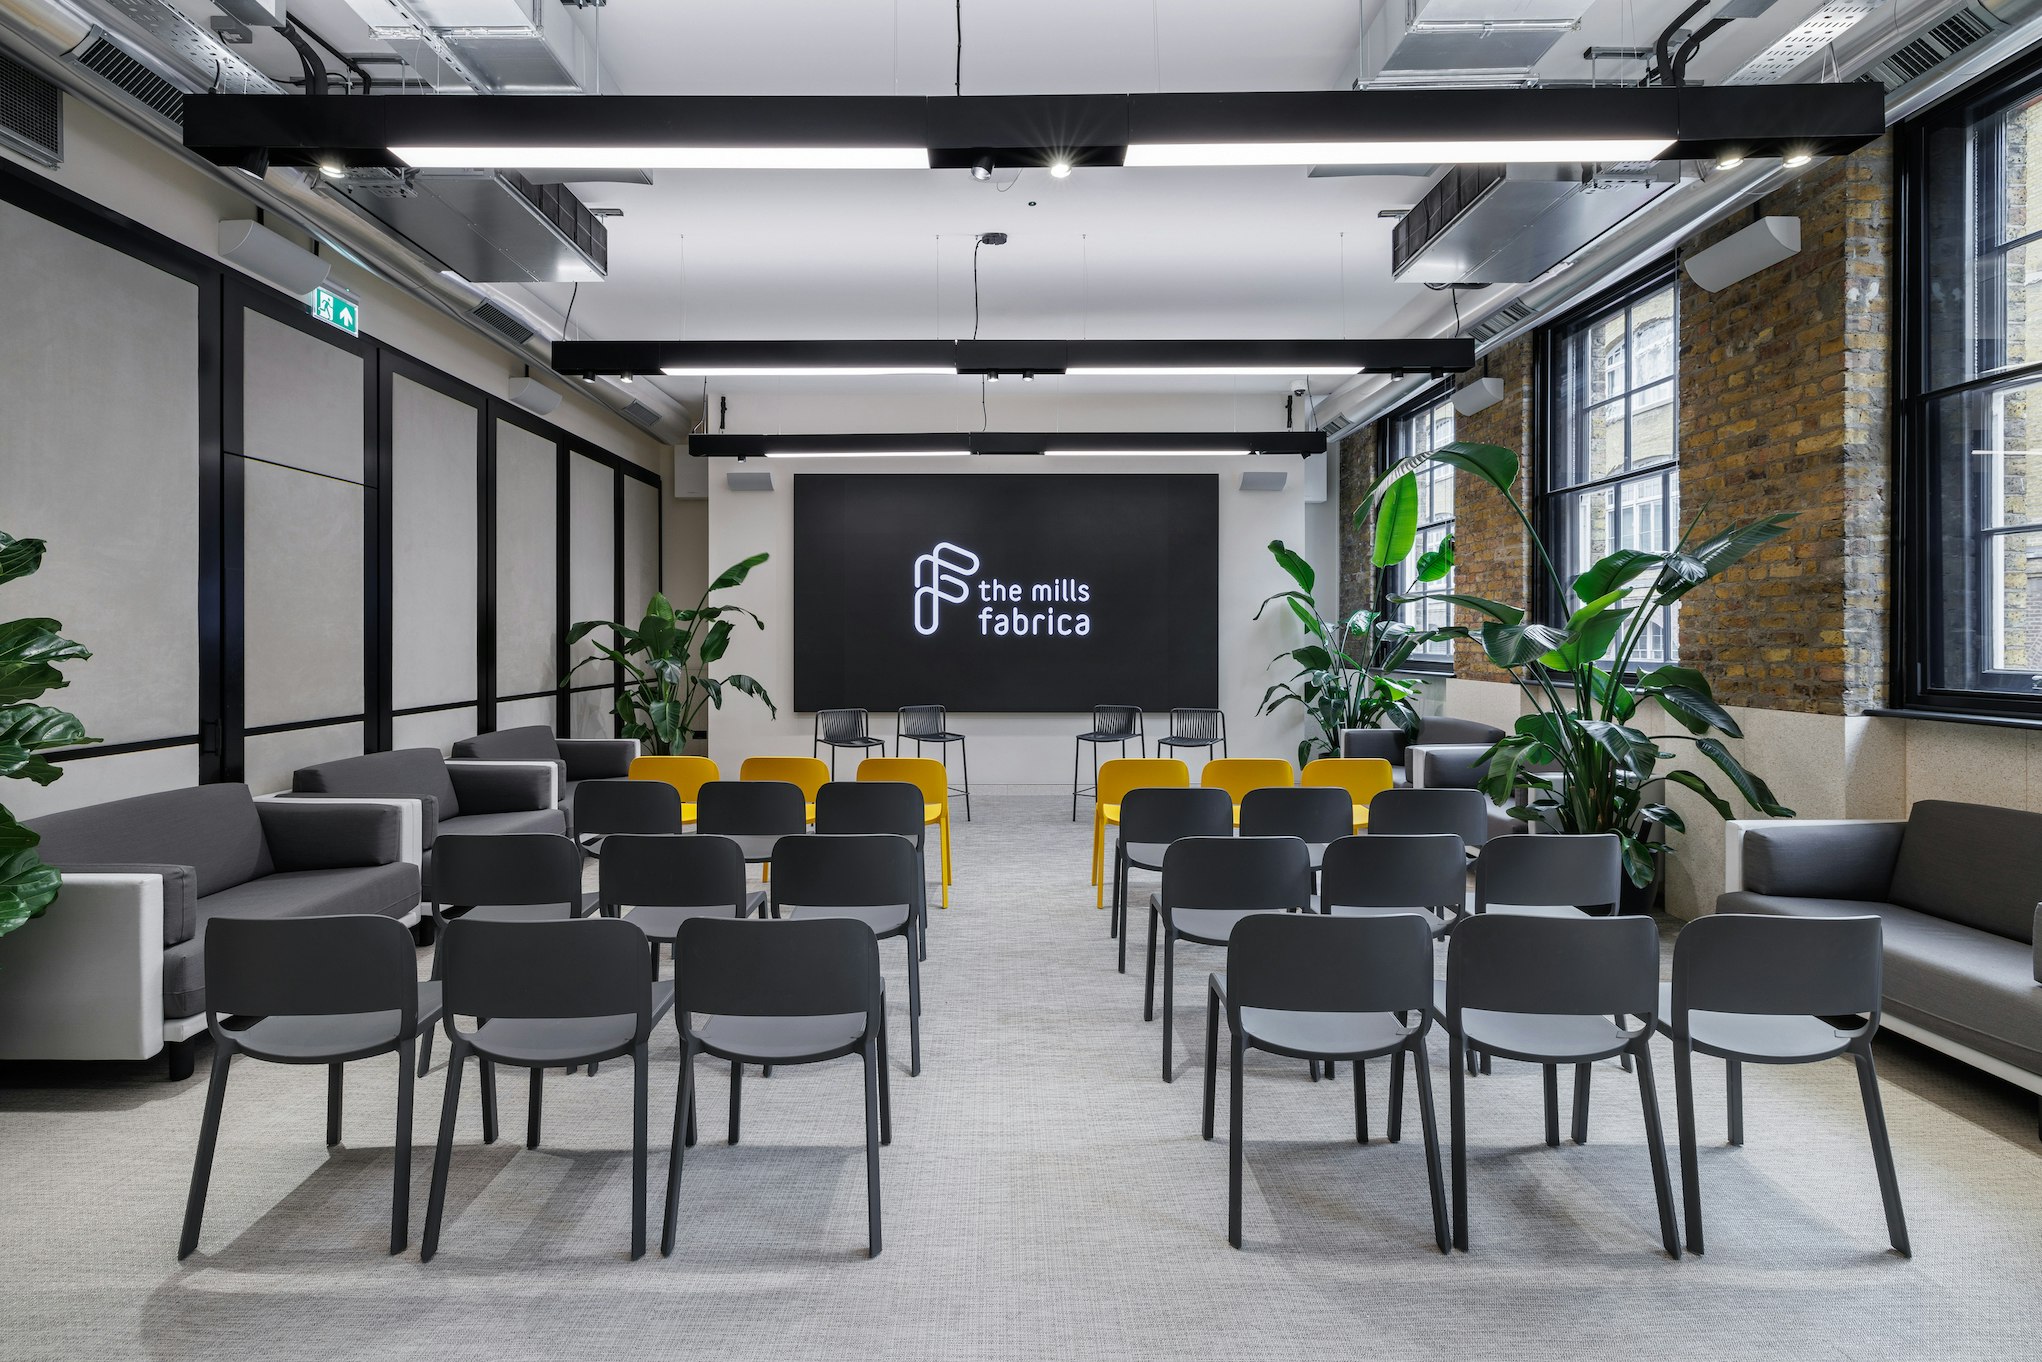 Hotel Conference Venues in West London - The Mills Fabrica